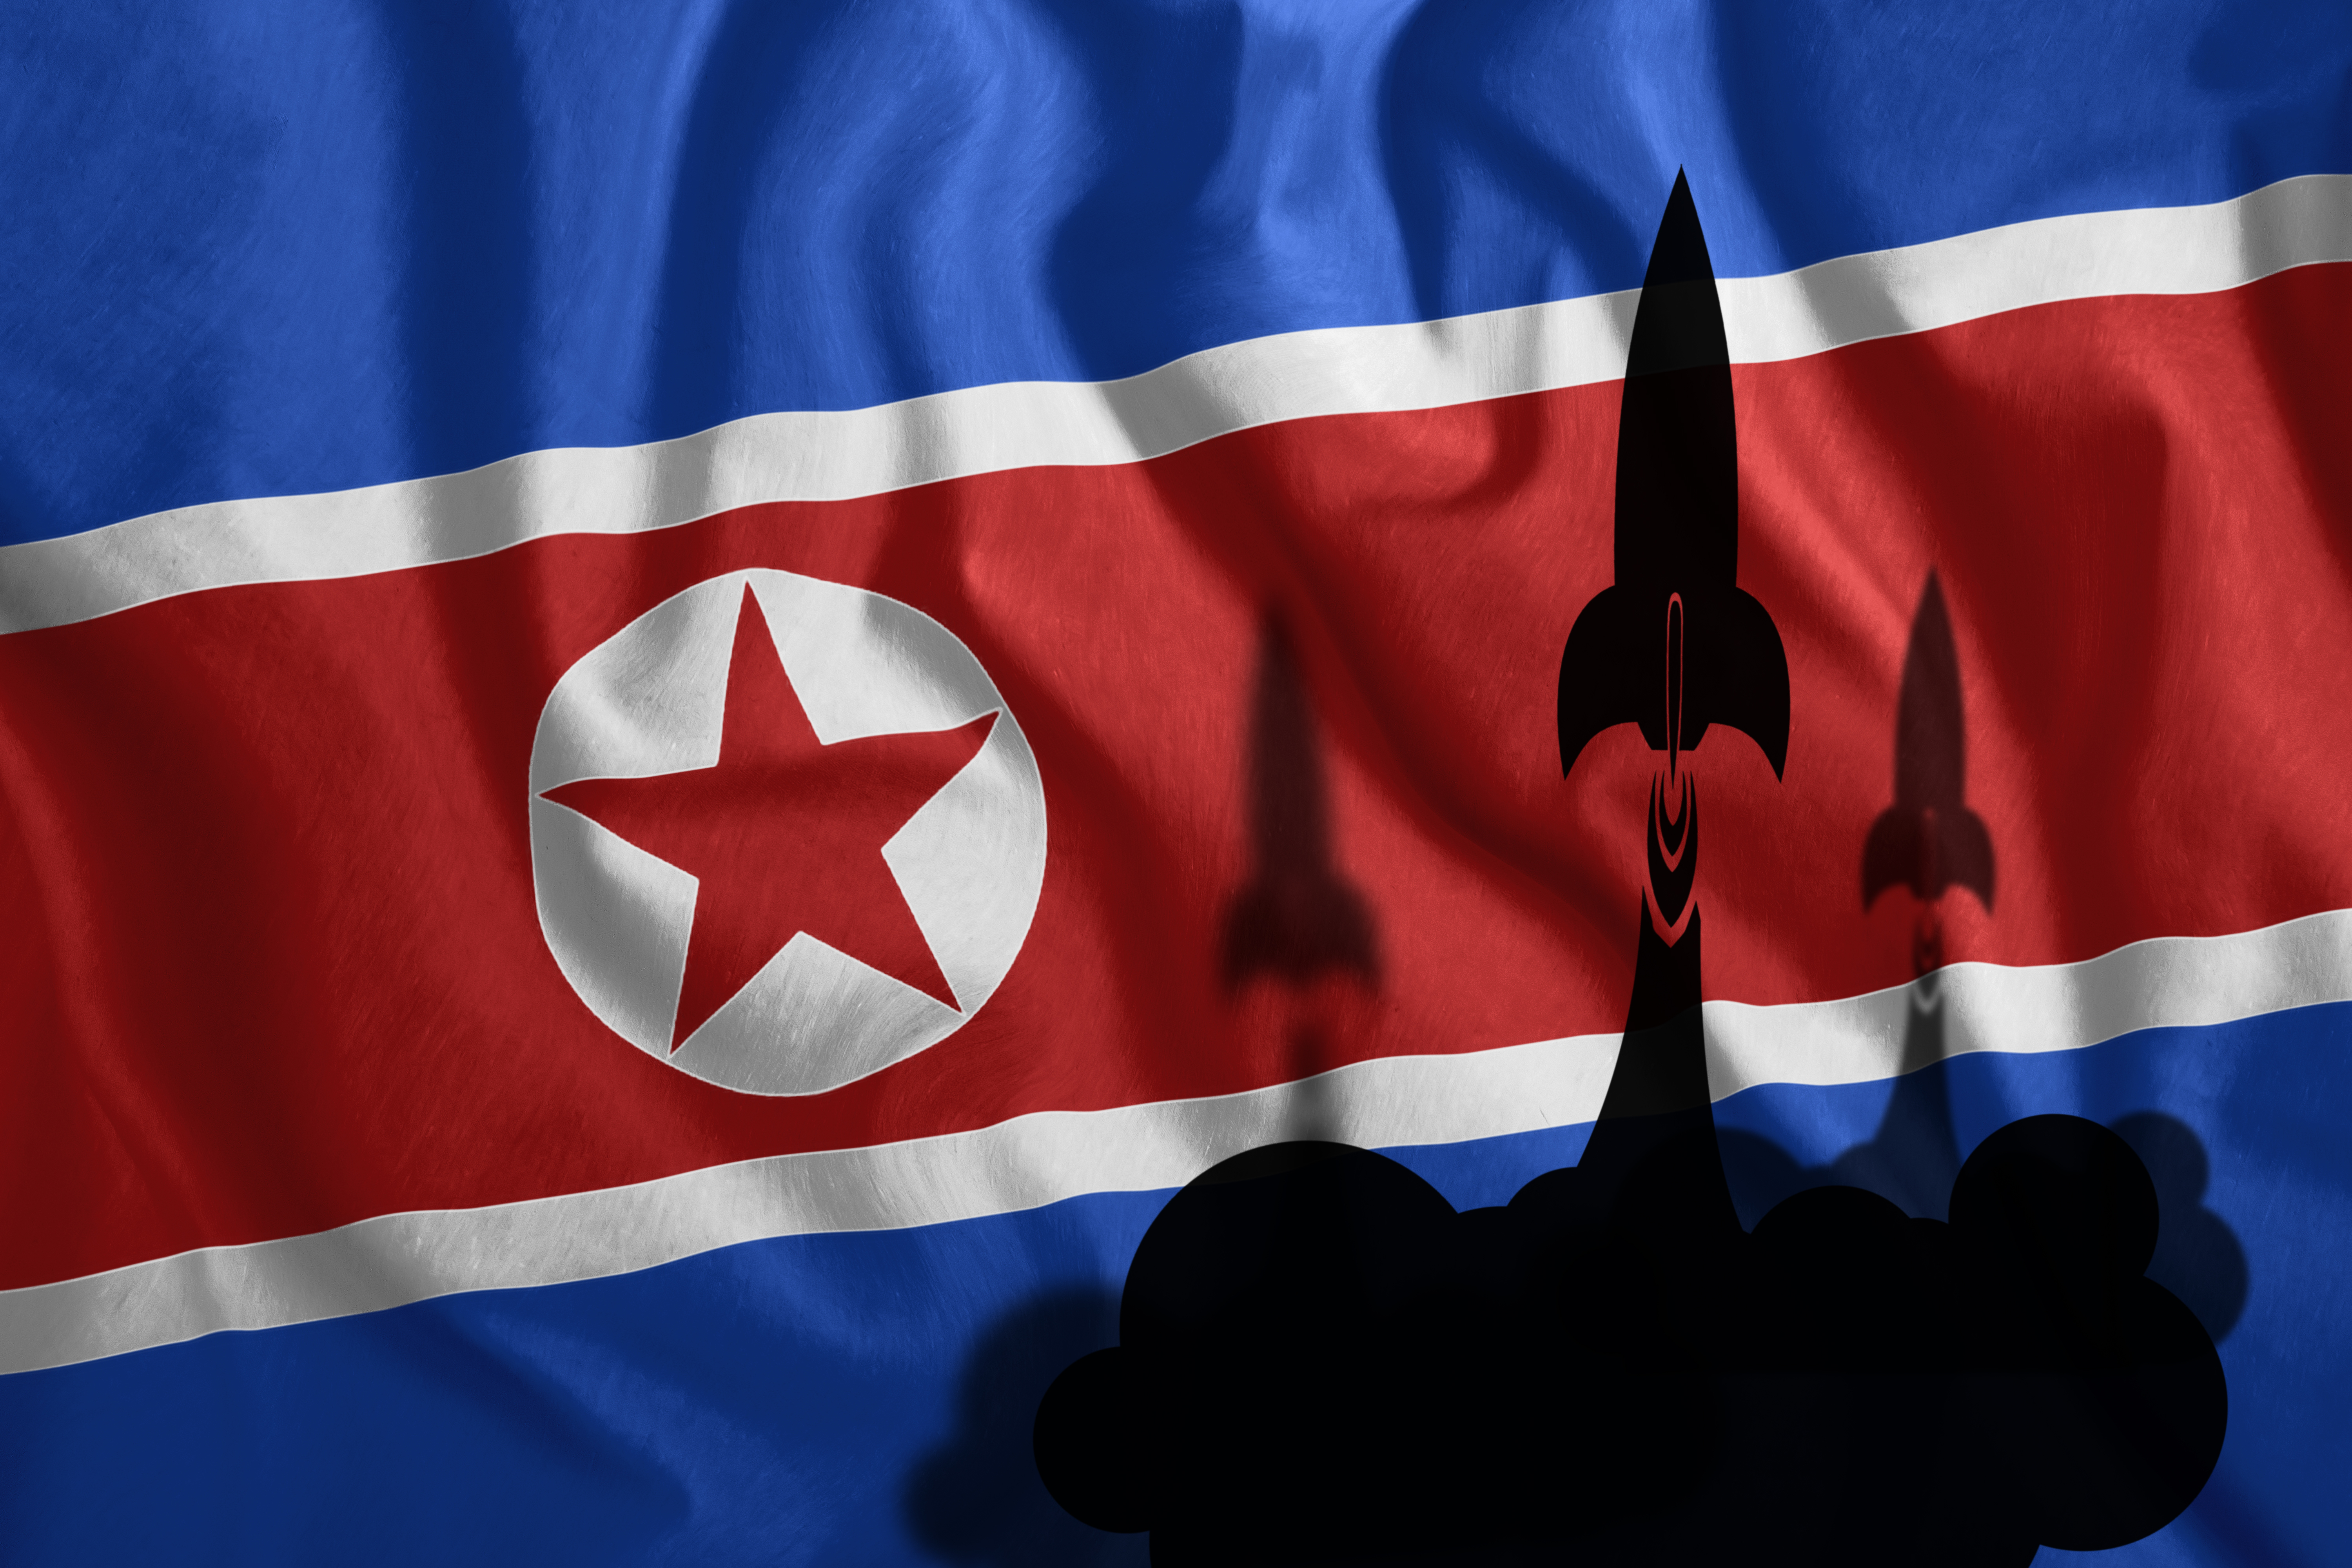 North Korea's Nuclear and Missile Development: Current Status and Prospects